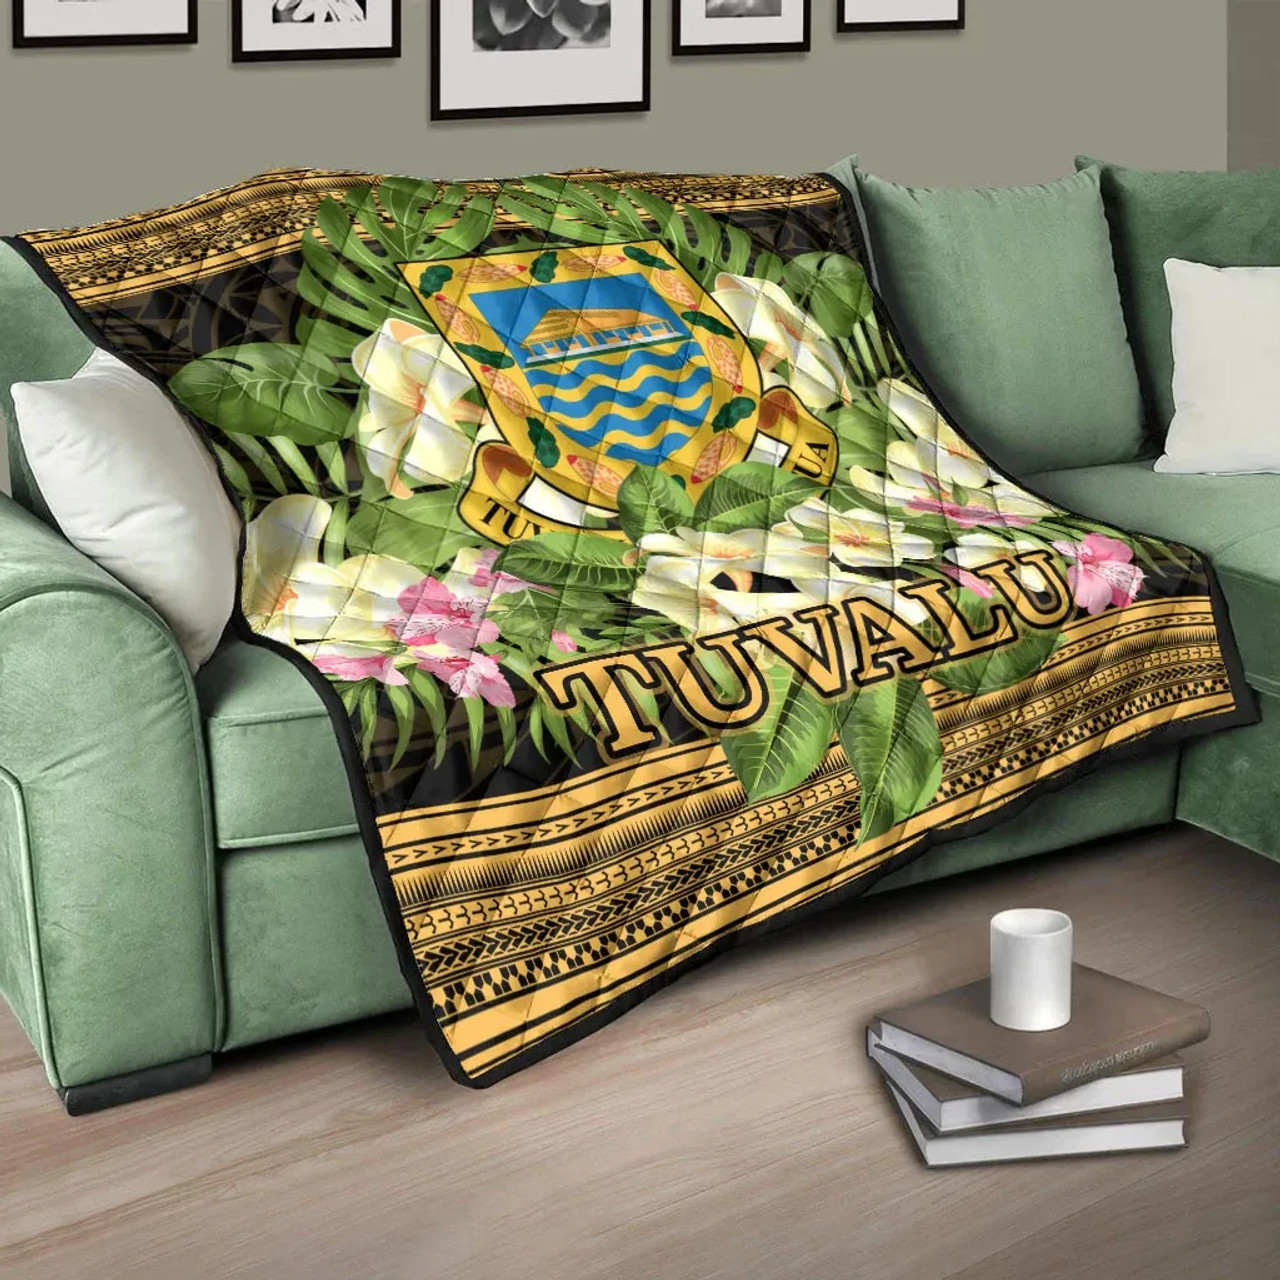 Tuvalu Premium Quilt - Polynesian Gold Patterns Collection 10